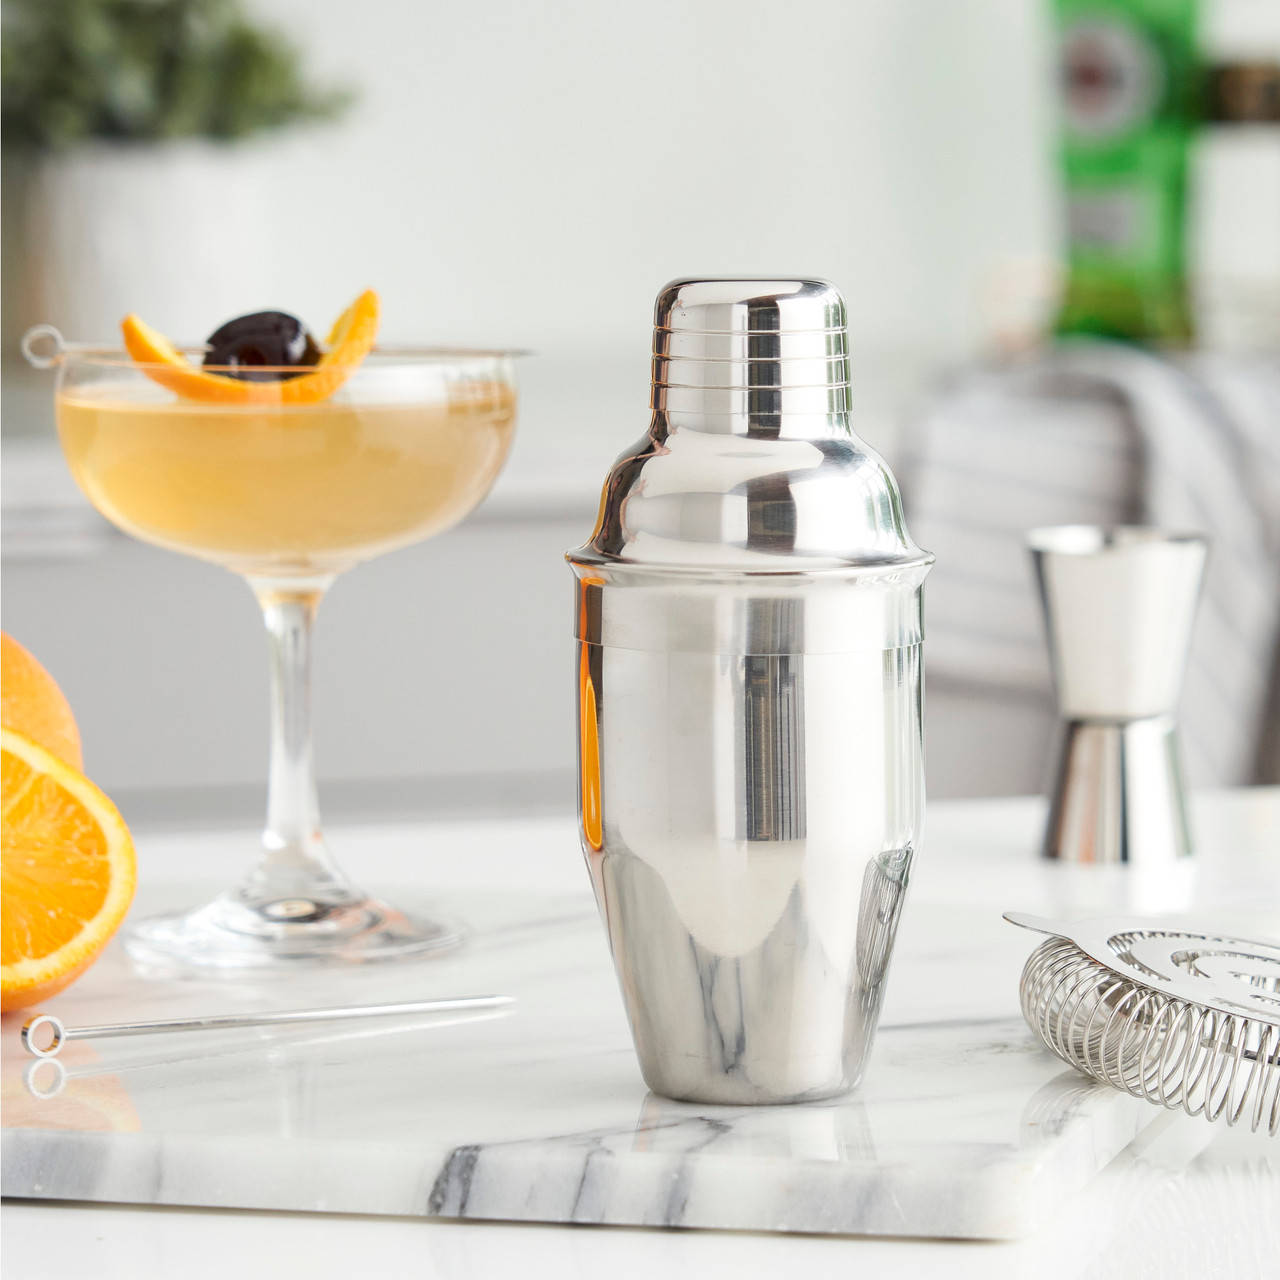 8.5 oz Stainless Steel Cocktail Shaker by True